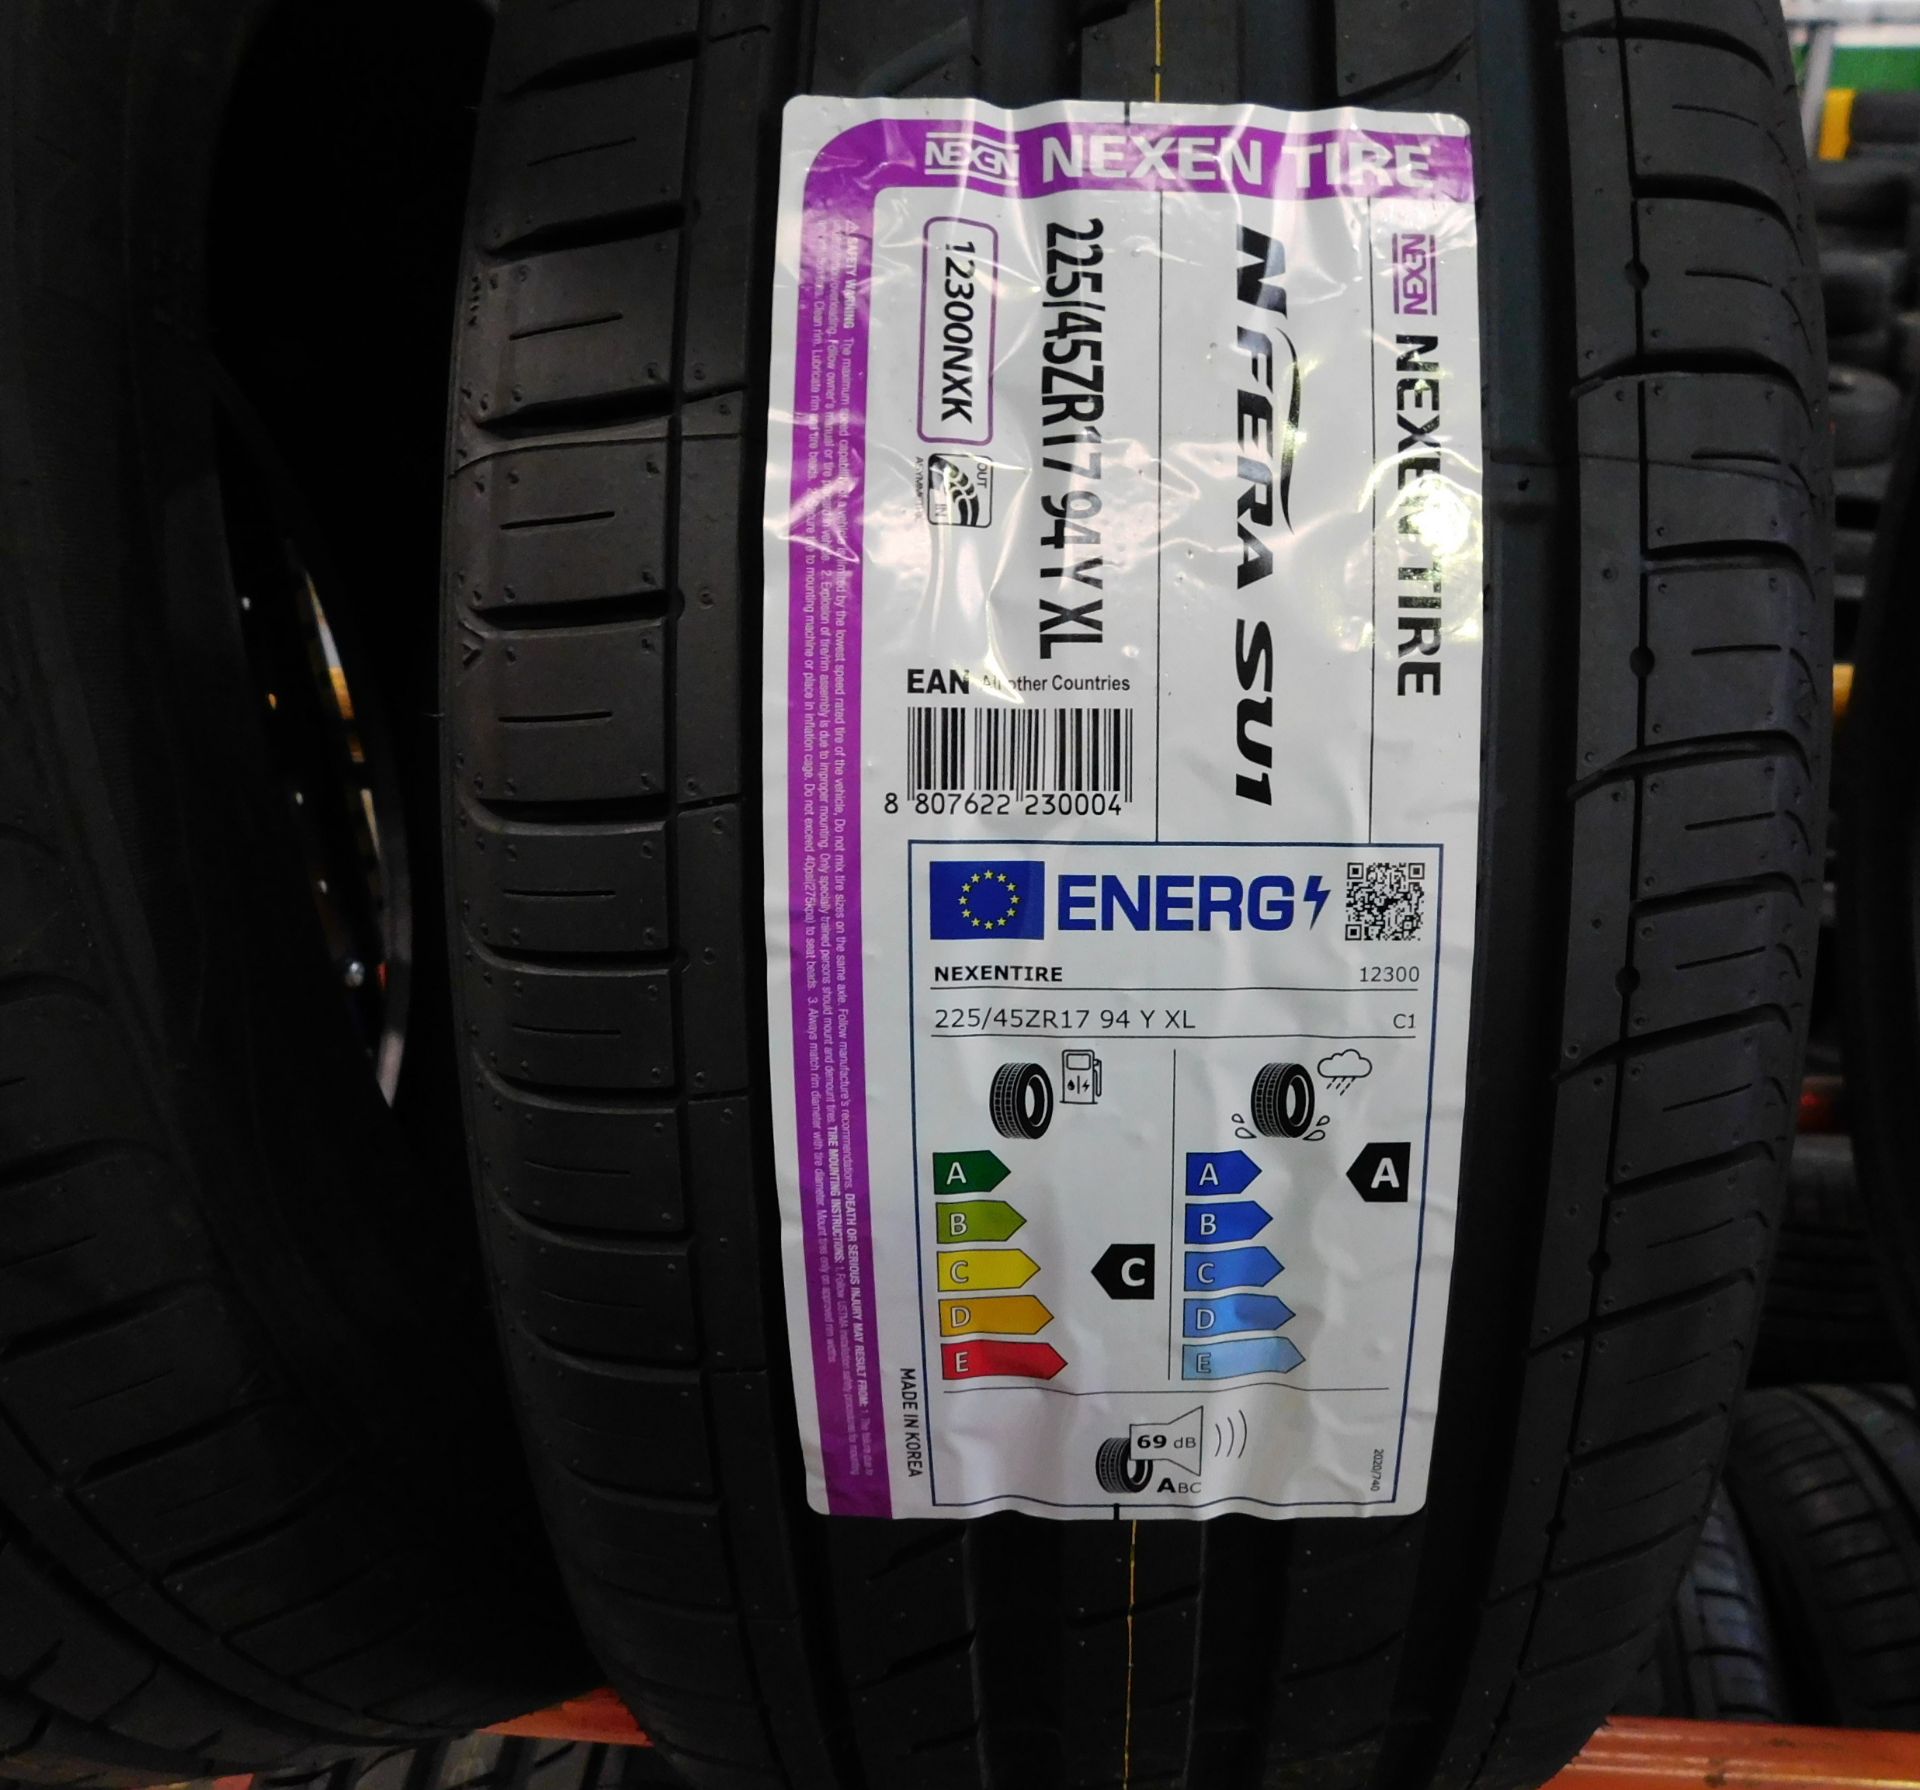 7 tyres, size 225/45 17 (Nexen) (Location Northampton. Please Refer to General Notes) - Image 2 of 2